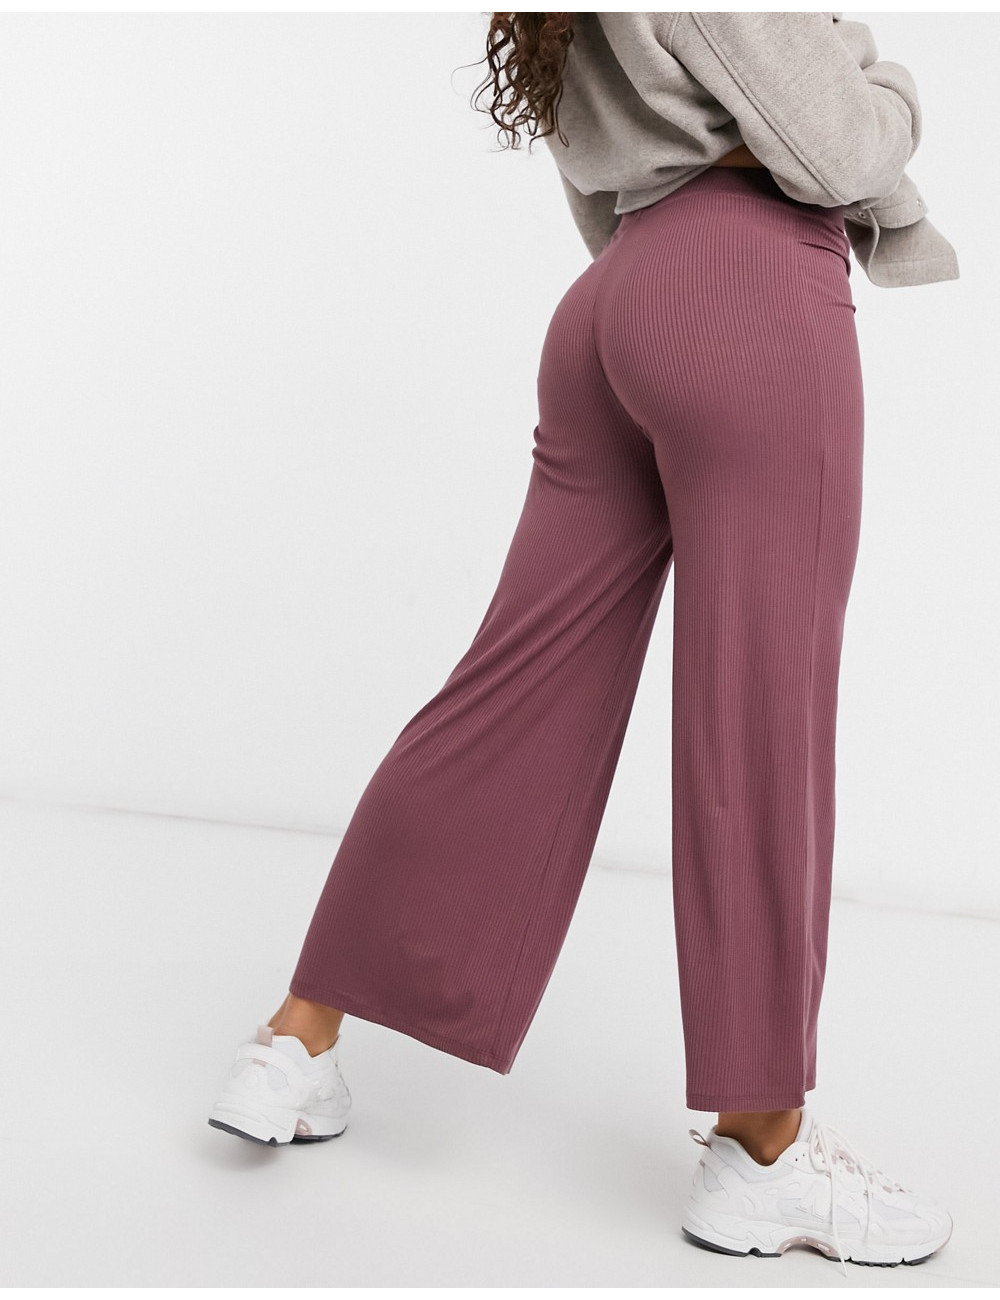 Cotton:On ribbed culotte in...